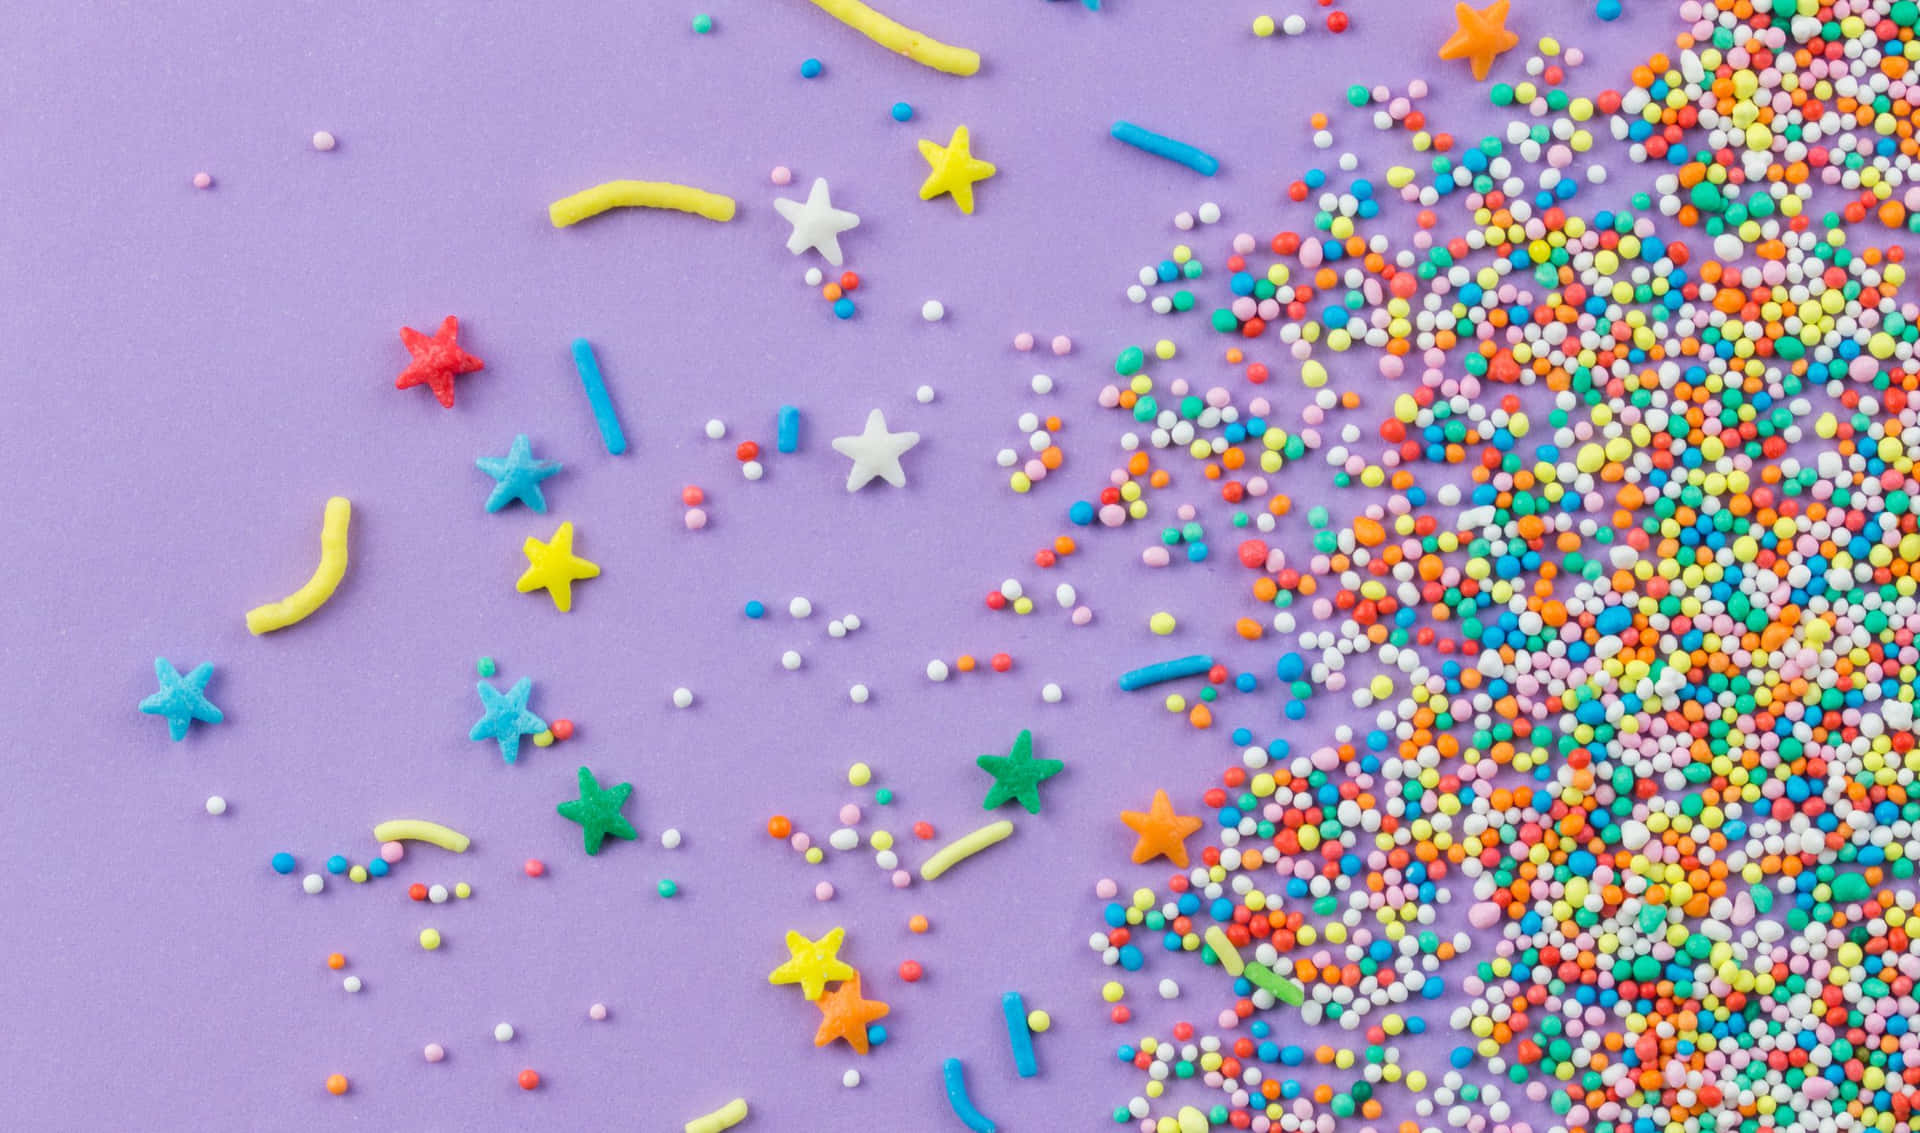 Colorful sprinkles adding a fun and vibrant aesthetic to the background.